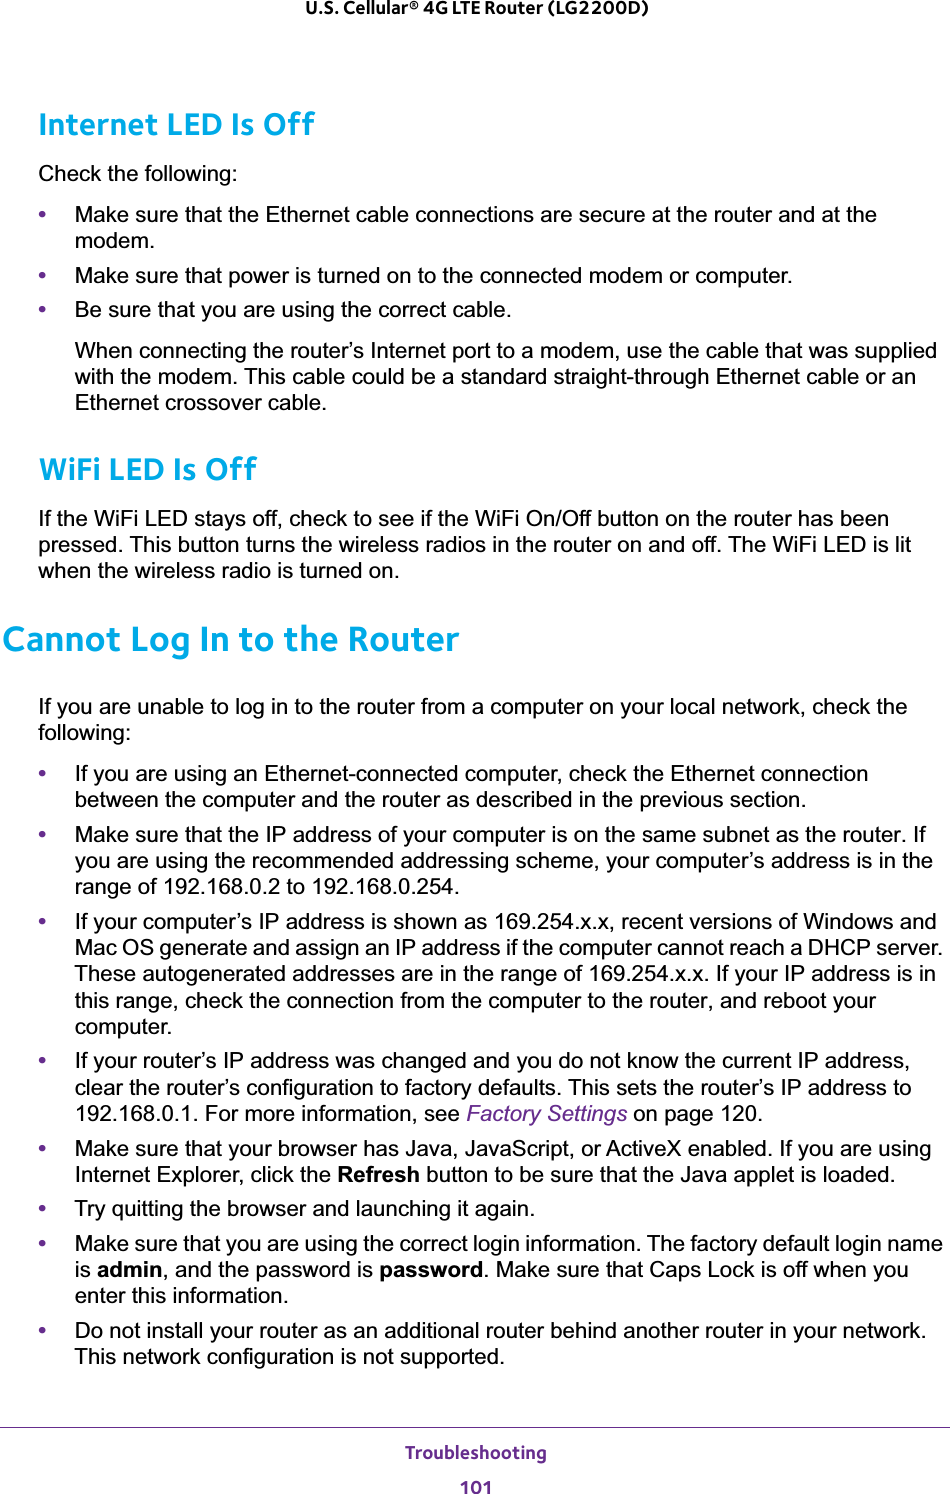 Troubleshooting101 U.S. Cellular® 4G LTE Router (LG2200D)Internet LED Is OffCheck the following:•Make sure that the Ethernet cable connections are secure at the router and at the modem.•Make sure that power is turned on to the connected modem or computer.•Be sure that you are using the correct cable.When connecting the router’s Internet port to a modem, use the cable that was supplied with the modem. This cable could be a standard straight-through Ethernet cable or an Ethernet crossover cable.WiFi LED Is OffIf the WiFi LED stays off, check to see if the WiFi On/Off button on the router has been pressed. This button turns the wireless radios in the router on and off. The WiFi LED is lit when the wireless radio is turned on.Cannot Log In to the RouterIf you are unable to log in to the router from a computer on your local network, check the following:•If you are using an Ethernet-connected computer, check the Ethernet connection between the computer and the router as described in the previous section.•Make sure that the IP address of your computer is on the same subnet as the router. If you are using the recommended addressing scheme, your computer’s address is in the range of 192.168.0.2 to 192.168.0.254. •If your computer’s IP address is shown as 169.254.x.x, recent versions of Windows and Mac OS generate and assign an IP address if the computer cannot reach a DHCP server. These autogenerated addresses are in the range of 169.254.x.x. If your IP address is in this range, check the connection from the computer to the router, and reboot your computer.•If your router’s IP address was changed and you do not know the current IP address, clear the router’s configuration to factory defaults. This sets the router’s IP address to 192.168.0.1. For more information, see Factory Settings on page 120.•Make sure that your browser has Java, JavaScript, or ActiveX enabled. If you are using Internet Explorer, click the Refresh button to be sure that the Java applet is loaded.•Try quitting the browser and launching it again.•Make sure that you are using the correct login information. The factory default login name is admin, and the password is password. Make sure that Caps Lock is off when you enter this information.•Do not install your router as an additional router behind another router in your network. This network configuration is not supported. 